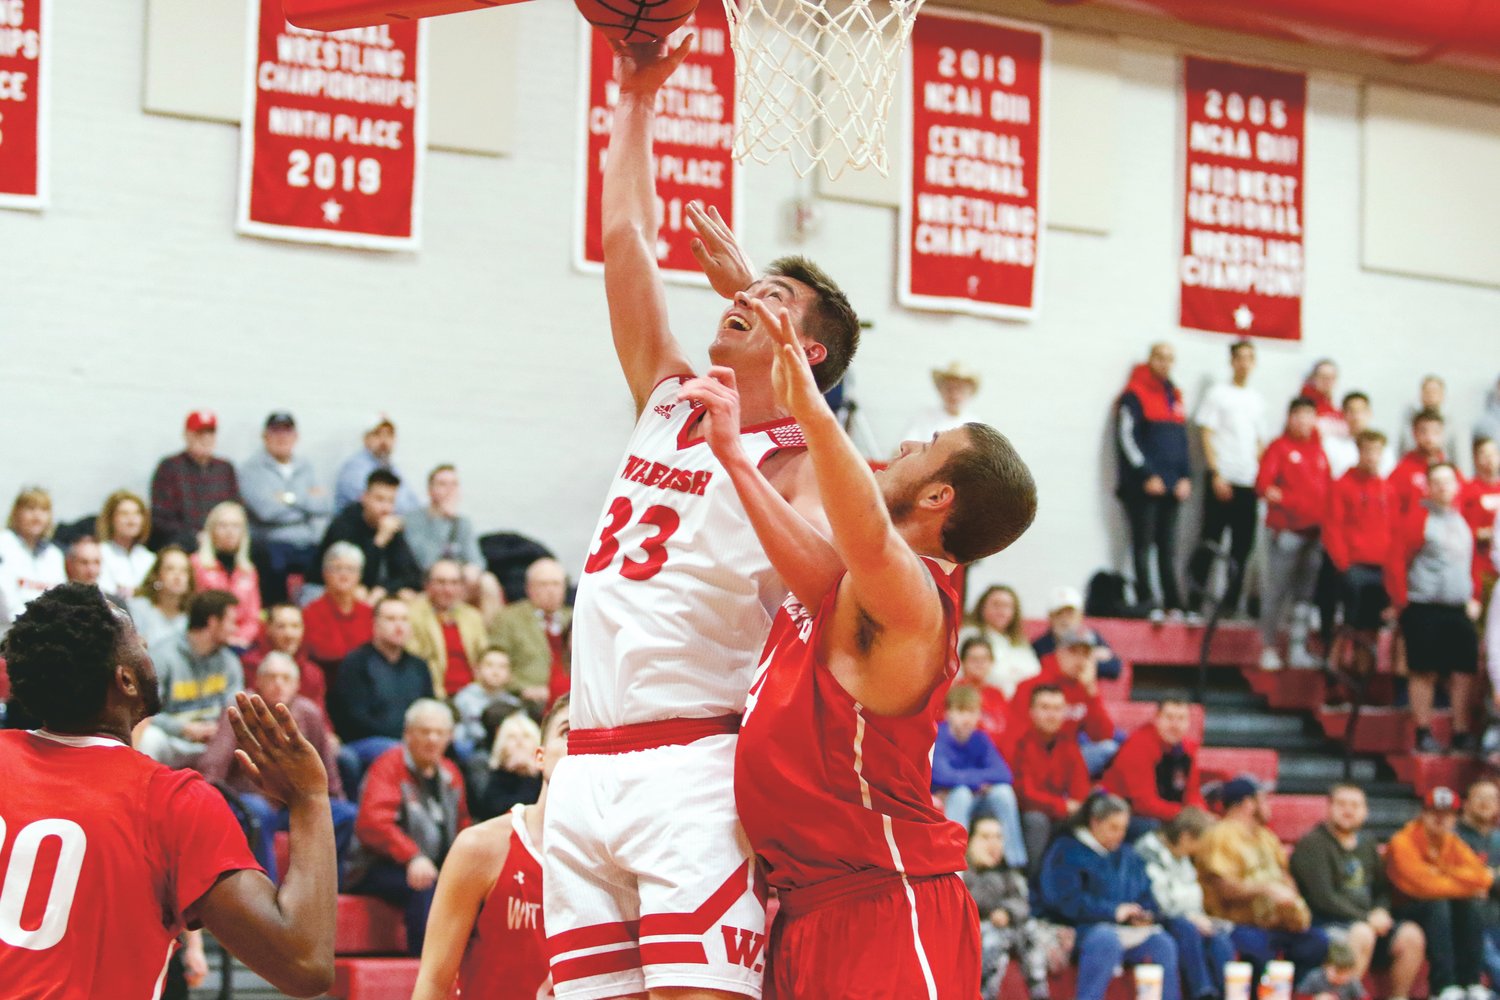 Wabash senior Harrison Hallstrom had six points and 14 rebounds in a 78-69 loss to No. 5 ranked Wittenberg on Wednesday night.